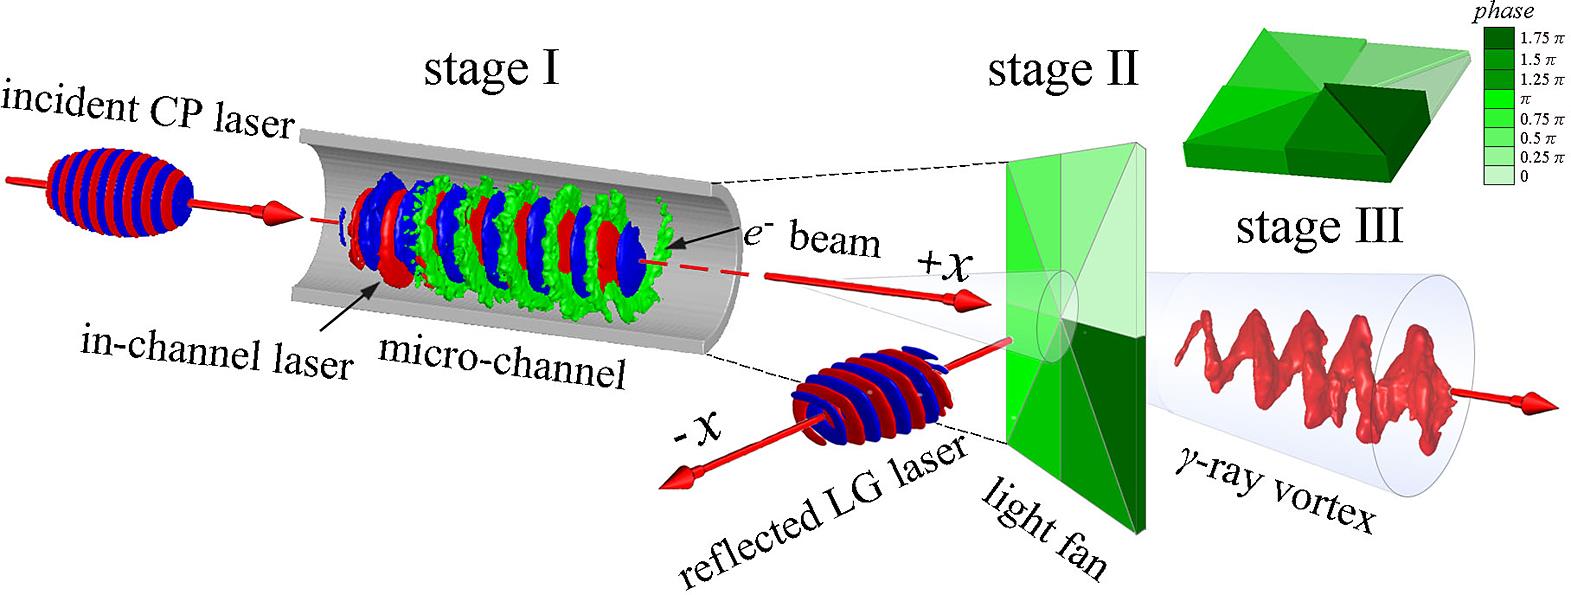 Schematic of γ-ray vortex generation from a laser-illuminated light-fan-in-channel target. A CP laser pulse is incident from the left and irradiates a micro-channel target. Electrons are extracted from the channel wall, travel along the channel, and are accelerated to hundreds of MeV by the longitudinal electric fields. Later, the laser pulse is reflected along the – x axis by a light fan and an LG laser pulse is thus formed which collides head-on with the dense energetic electron beam with large AM. This finally results in the generation of a bright multi-MeV γ-ray vortex. Note that the fan-foil is perpendicular to the axis of the micro-channel and the arrow of reflected laser points to the micro-channel.